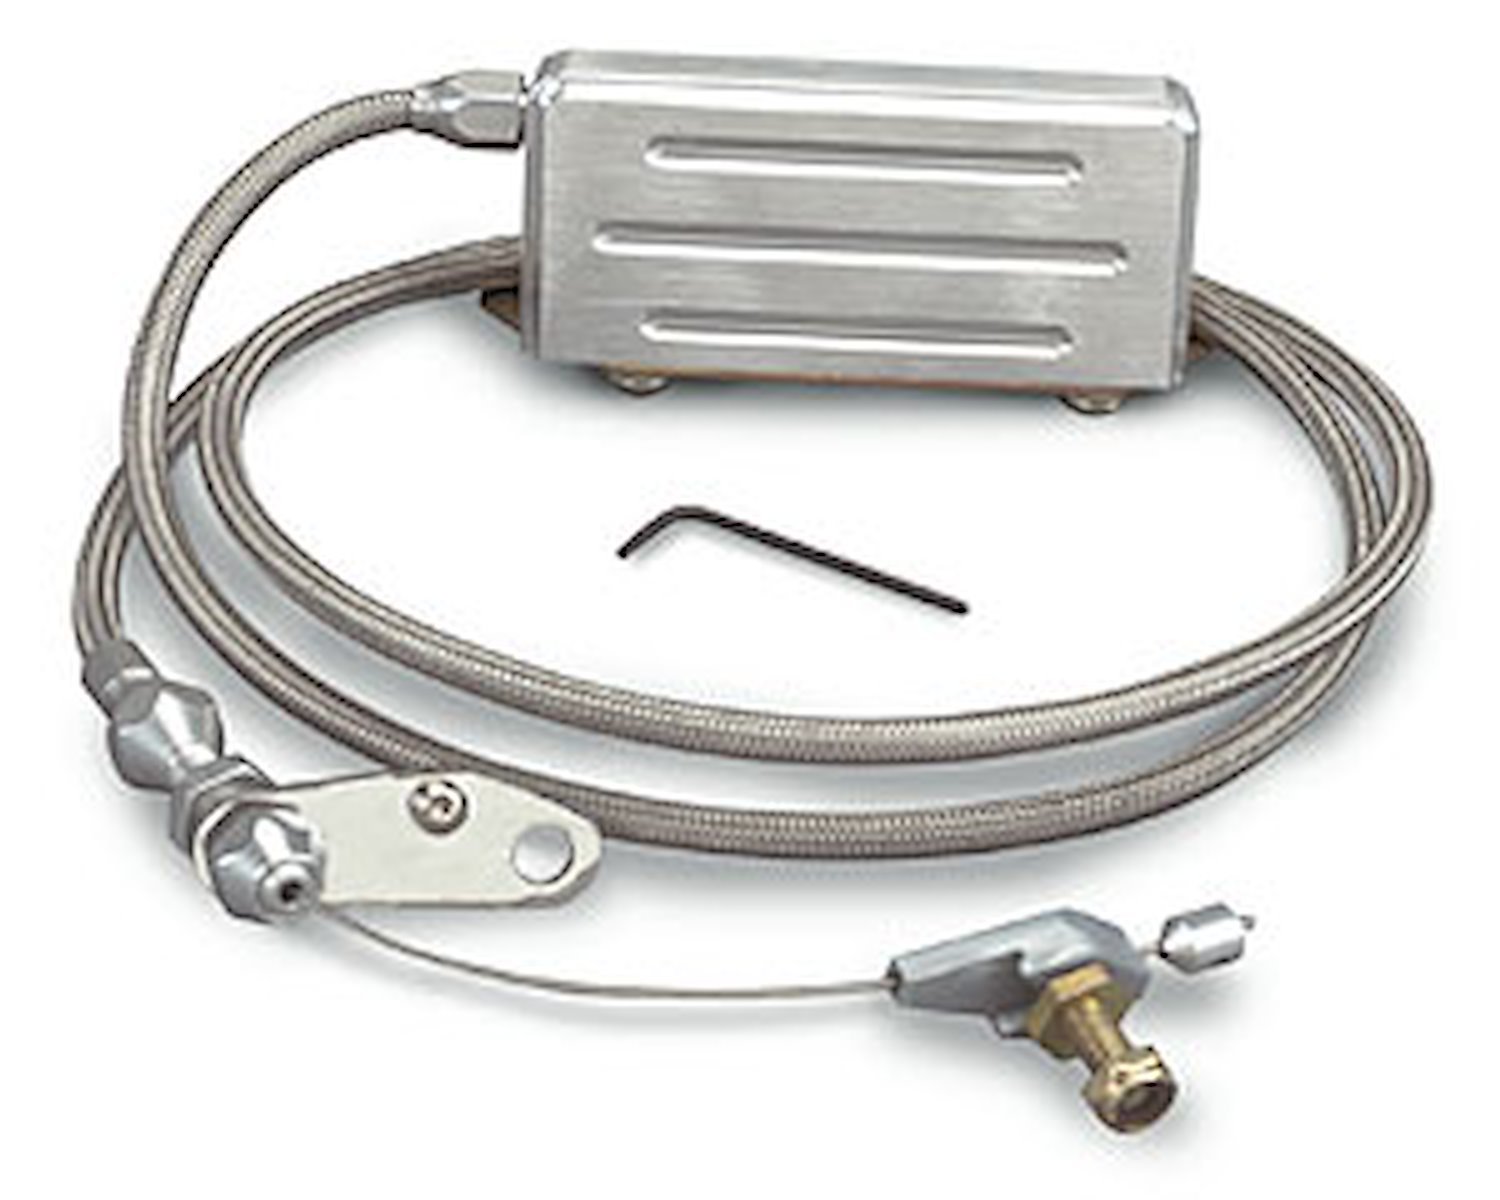 GM TH-400 Stainless Steel Electric Kickdown Cable Kit